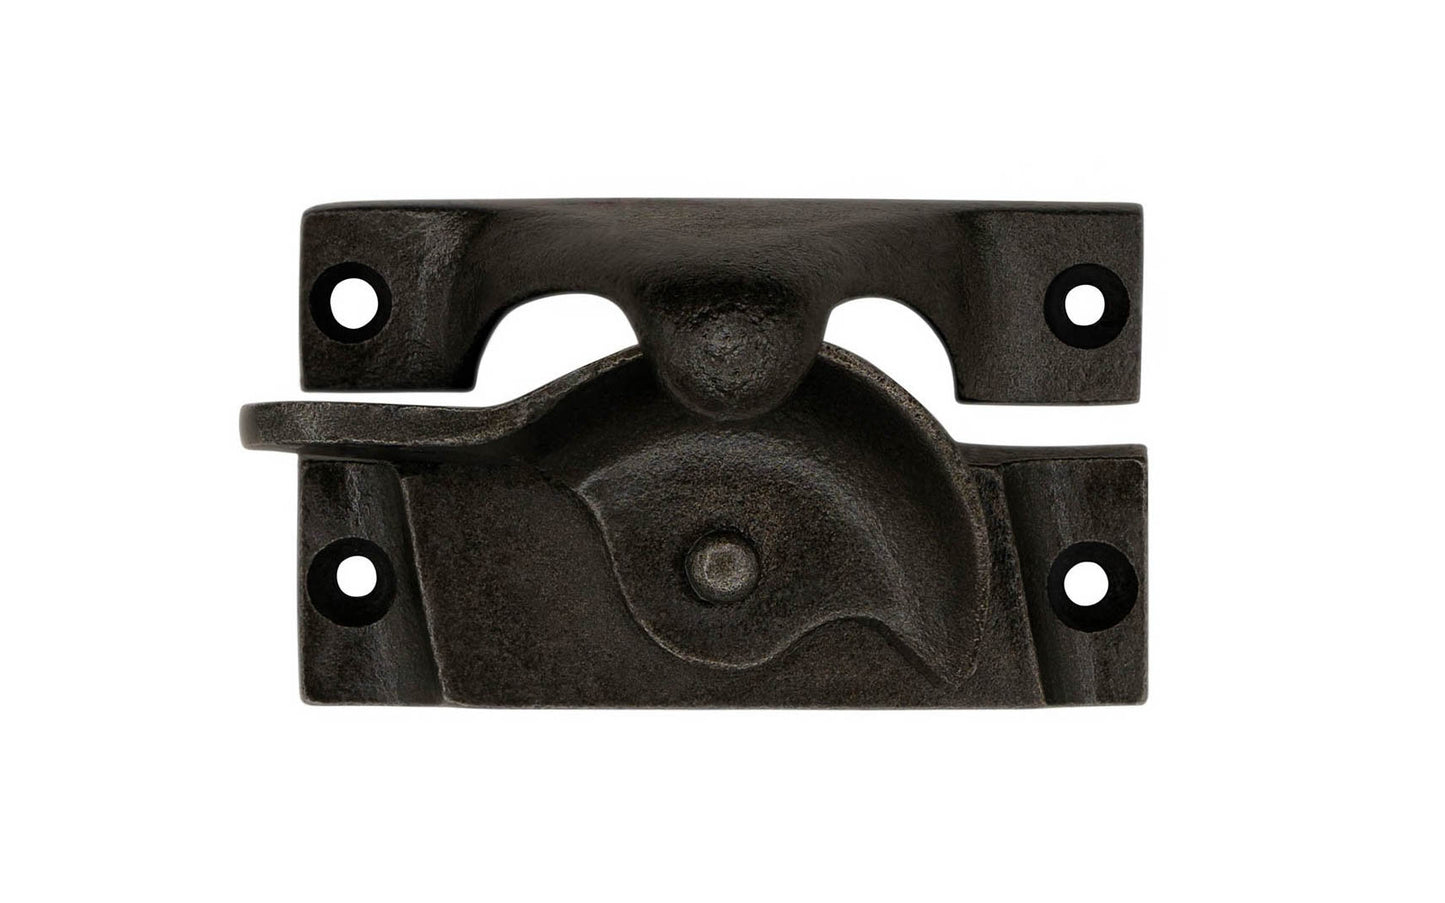 A rustic-looking Traditional Cast Iron crescent-style sash lock designed for sash or hung windows. This well-made lock is formed of cast iron material with a durable pivot turn. The turn operates smoothly & will lock & tighten your windows securely in place. Vintage cast iron finish. Model 88455